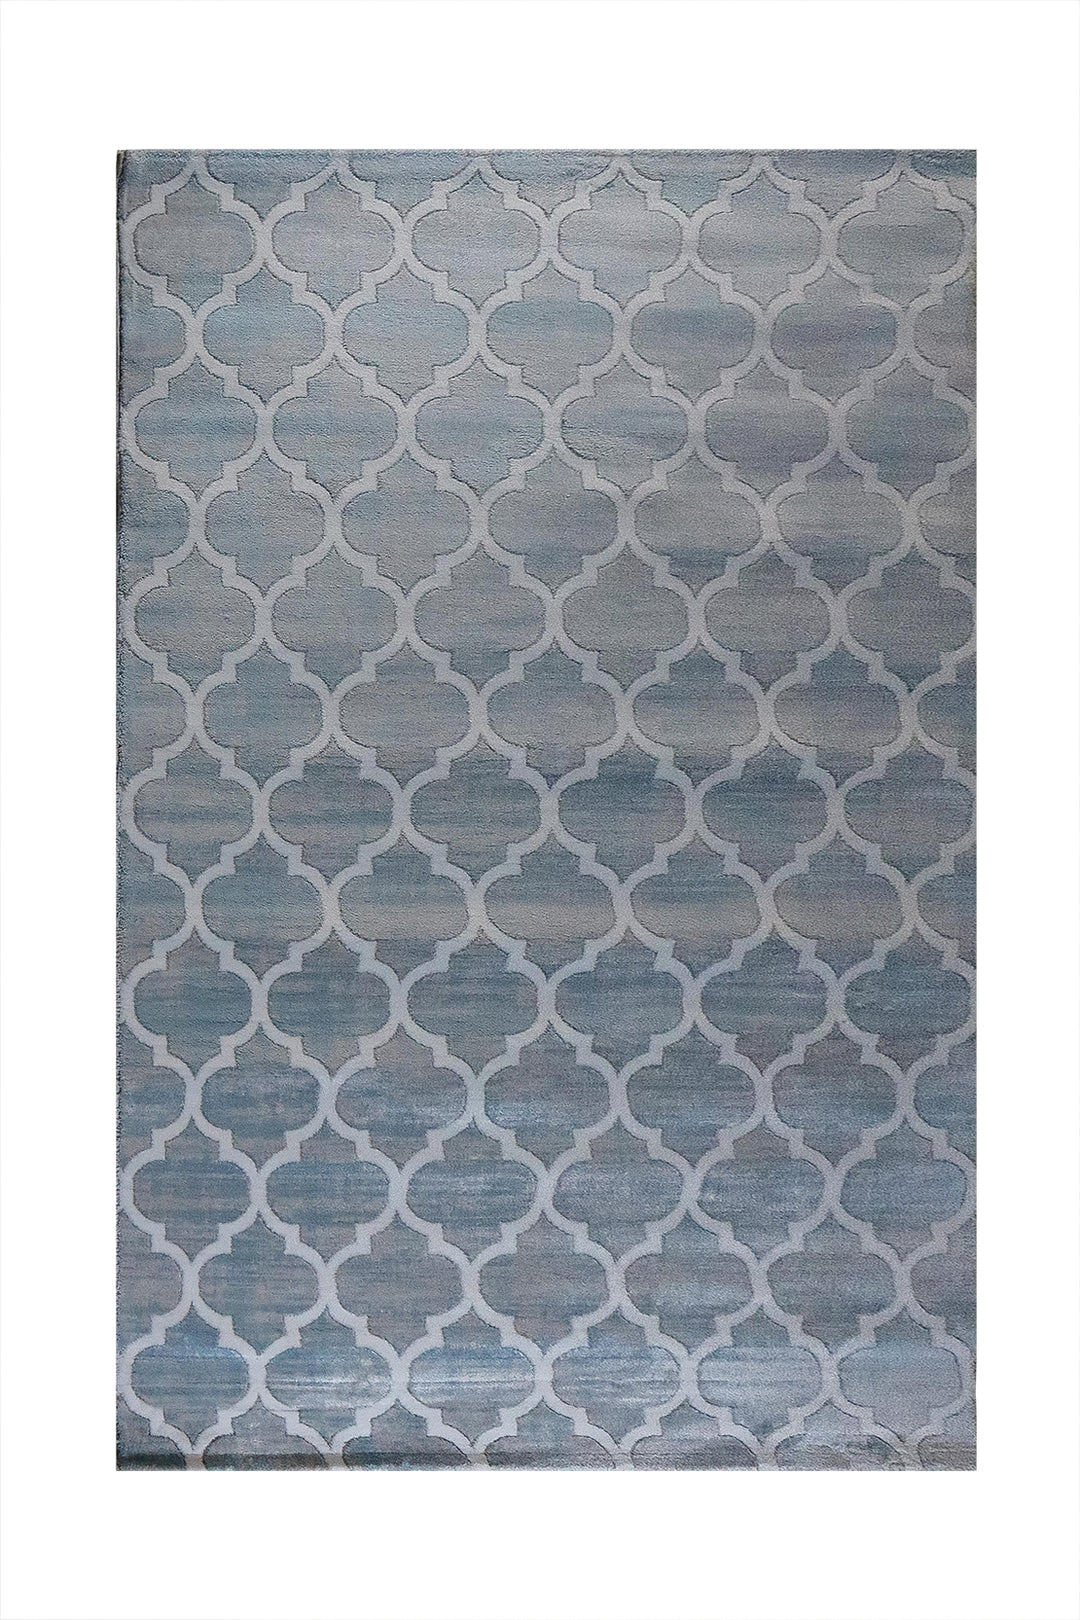 Turkish Modern Rug - 4.9 x 7.5 FT - Rug Festival 1, Blue and Cream - Superior Comfort, Modern & Contemporary Style Accent Rugs